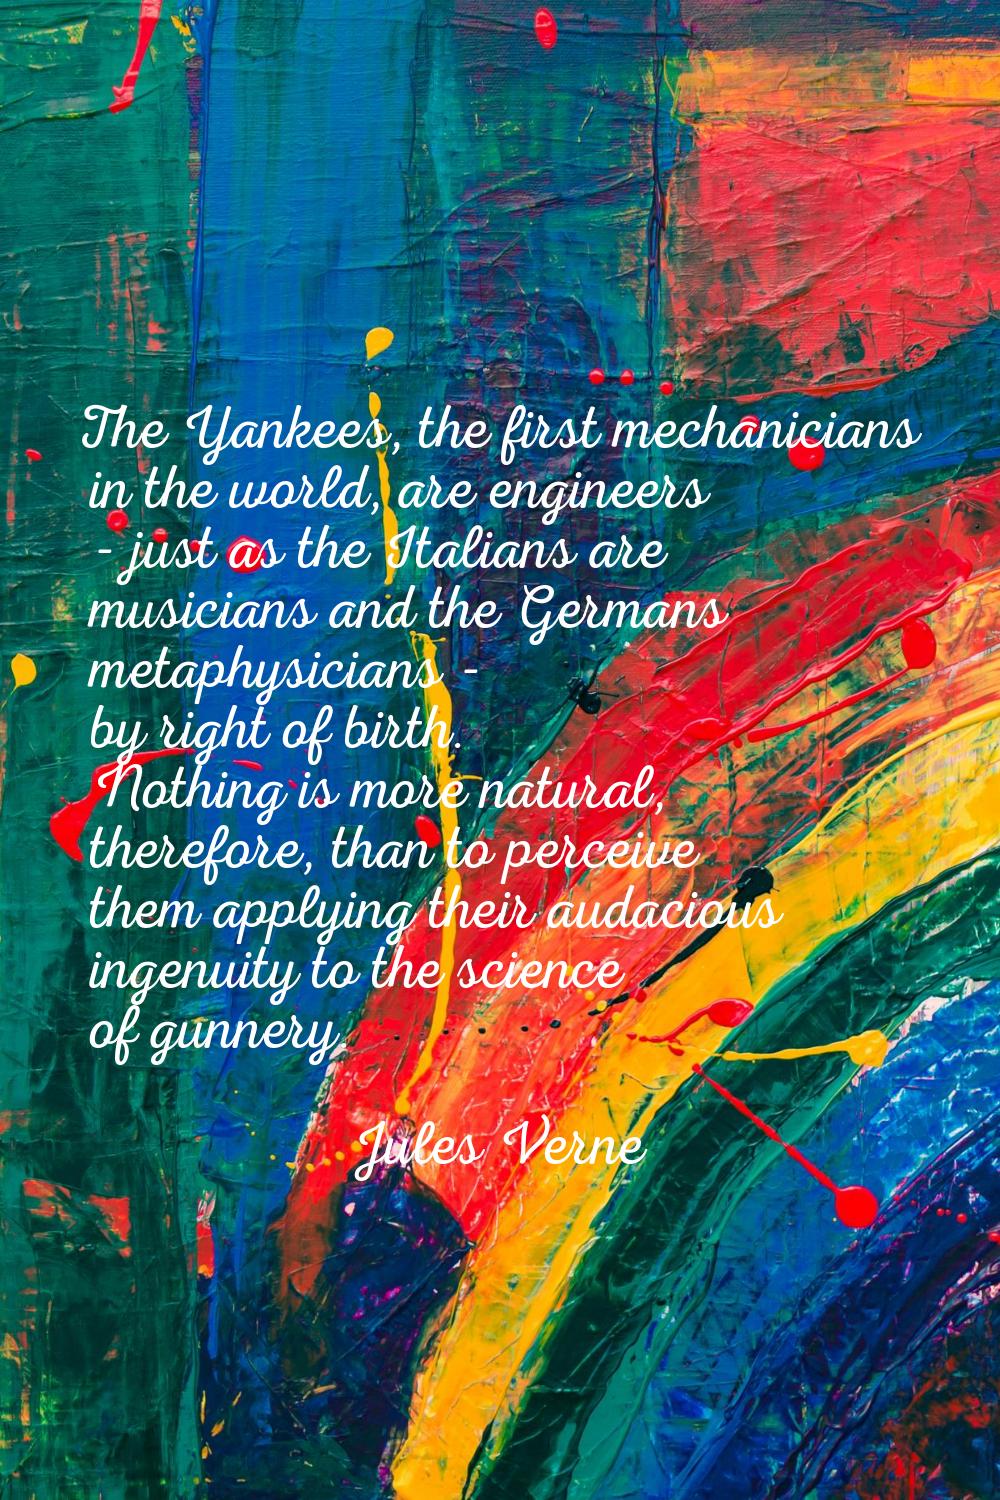 The Yankees, the first mechanicians in the world, are engineers - just as the Italians are musician